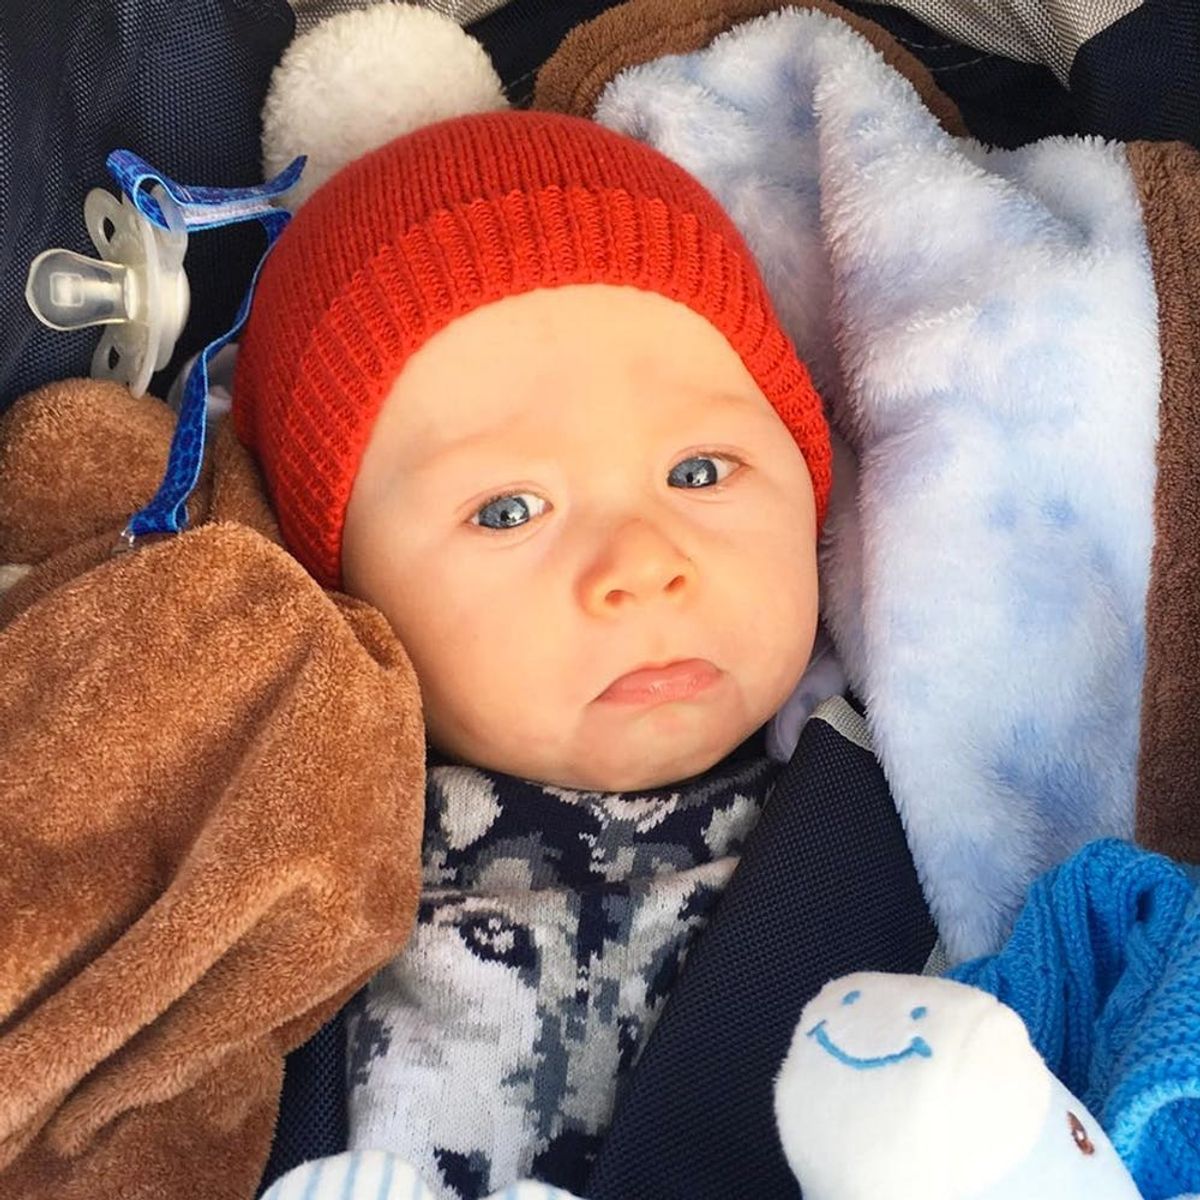 7 Celebrity Babies Celebrating Their First Christmas